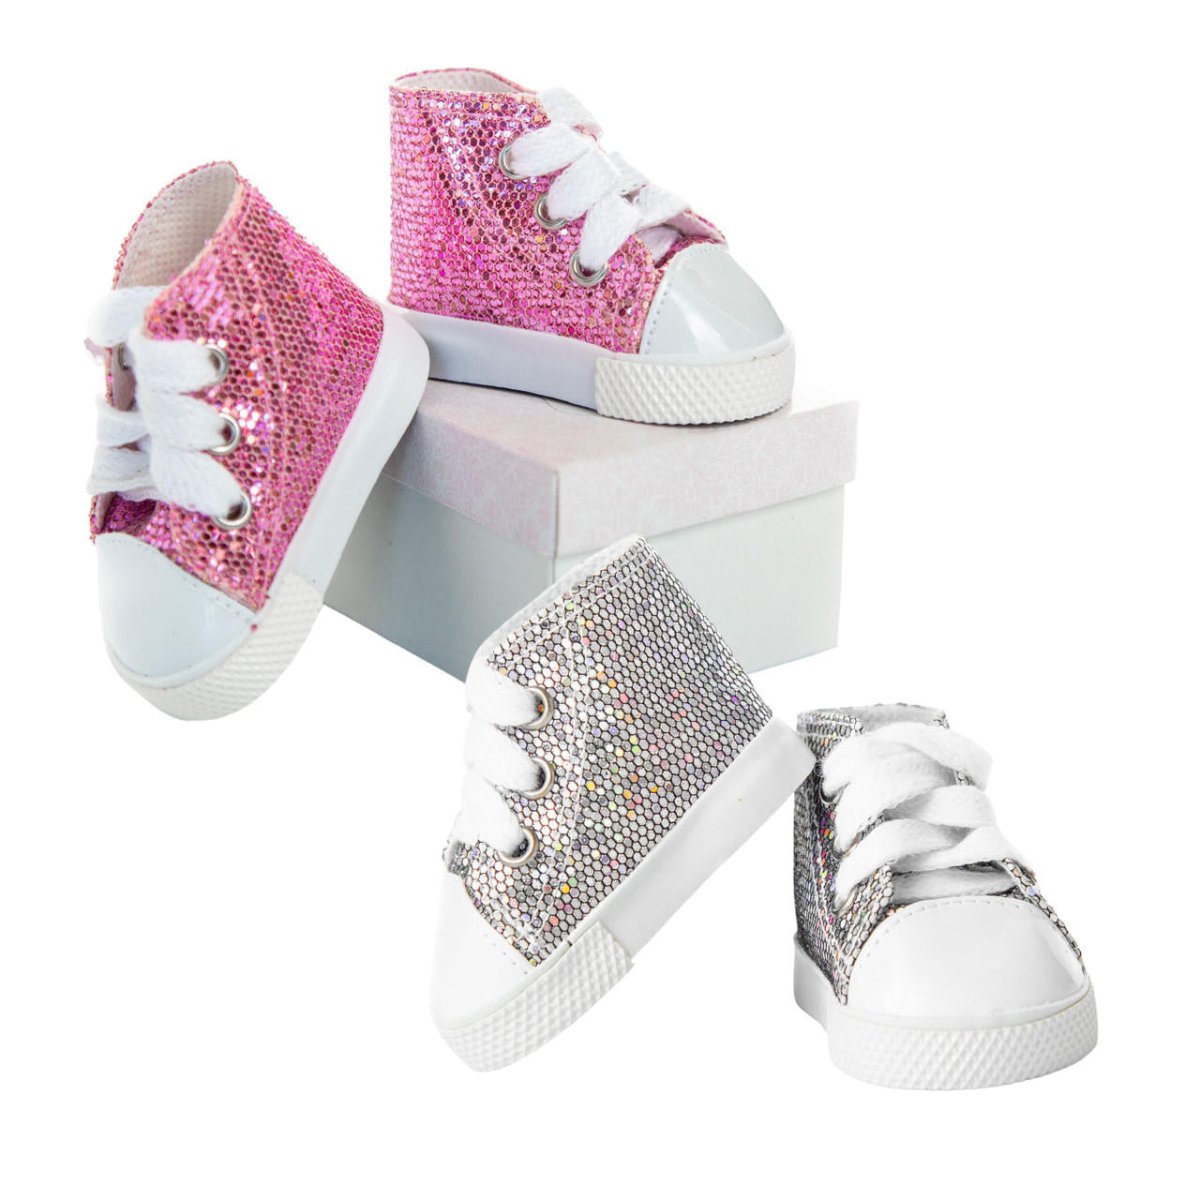 Set of 2 Pair of Sparkly Sneaker Shoes for 18" Dolls Bundle - Simon's Collectibles